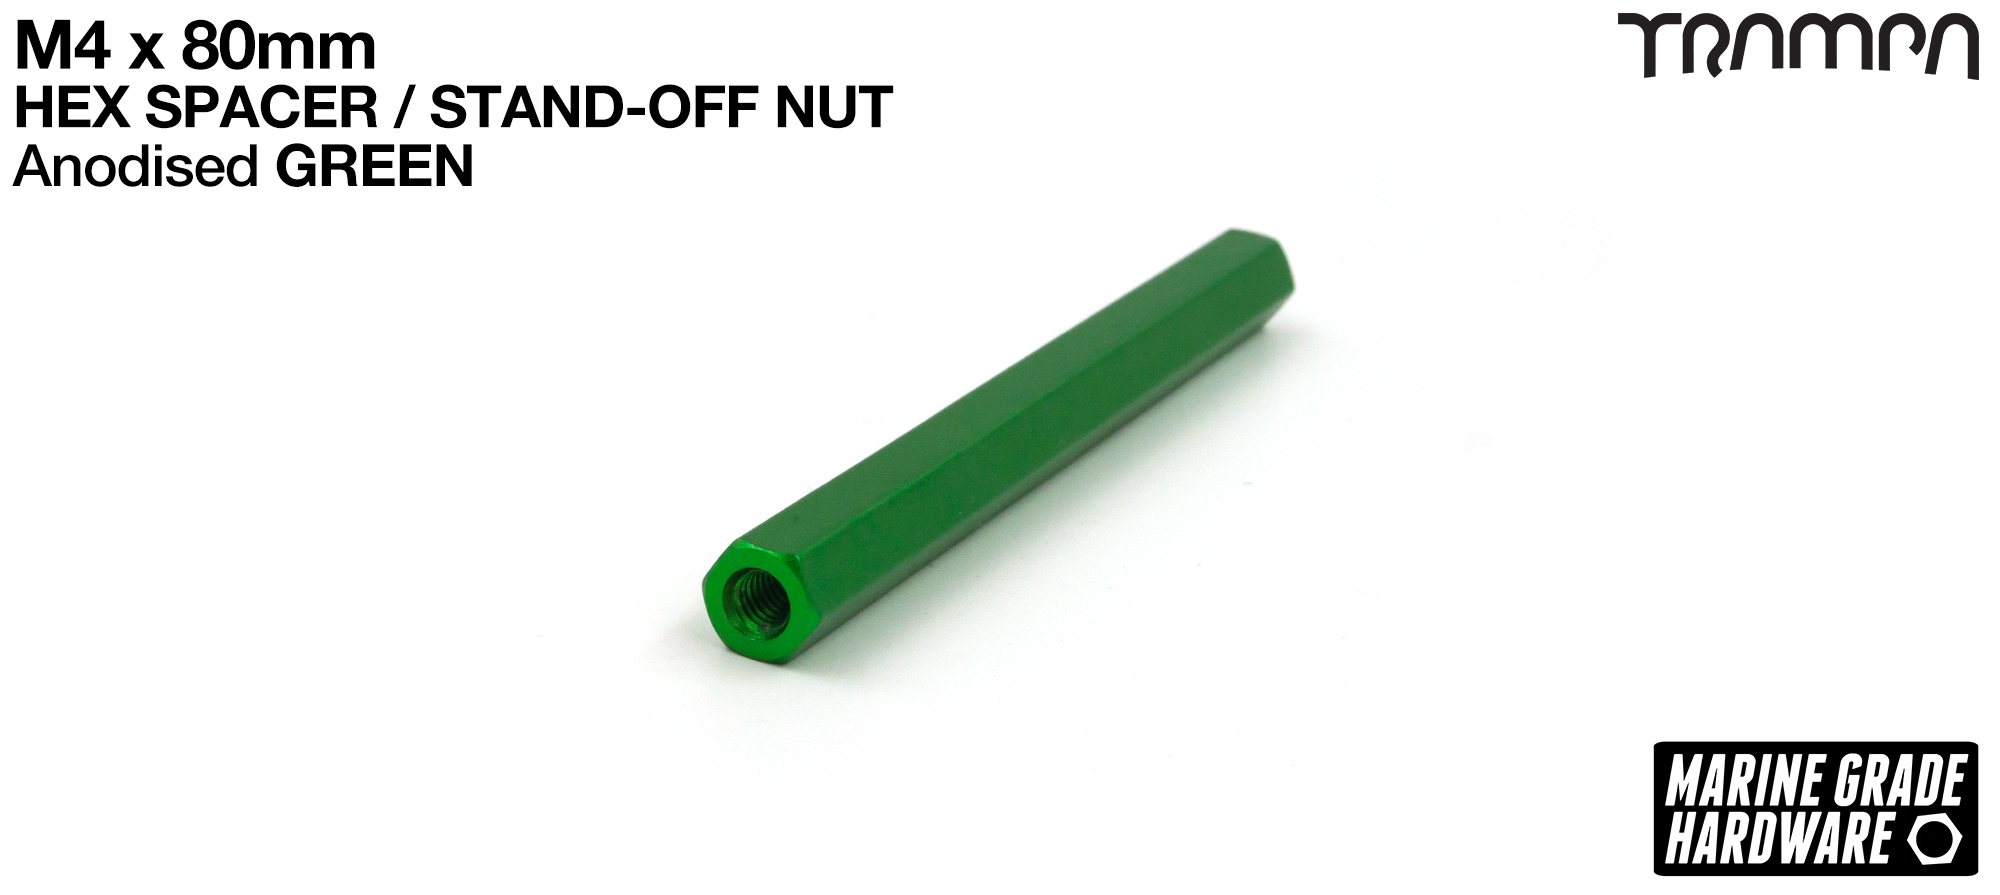 M4 x 80mm Aluminium Threaded Spacer Nut Used for assembling the BEAST Battery Boxes - GREEN